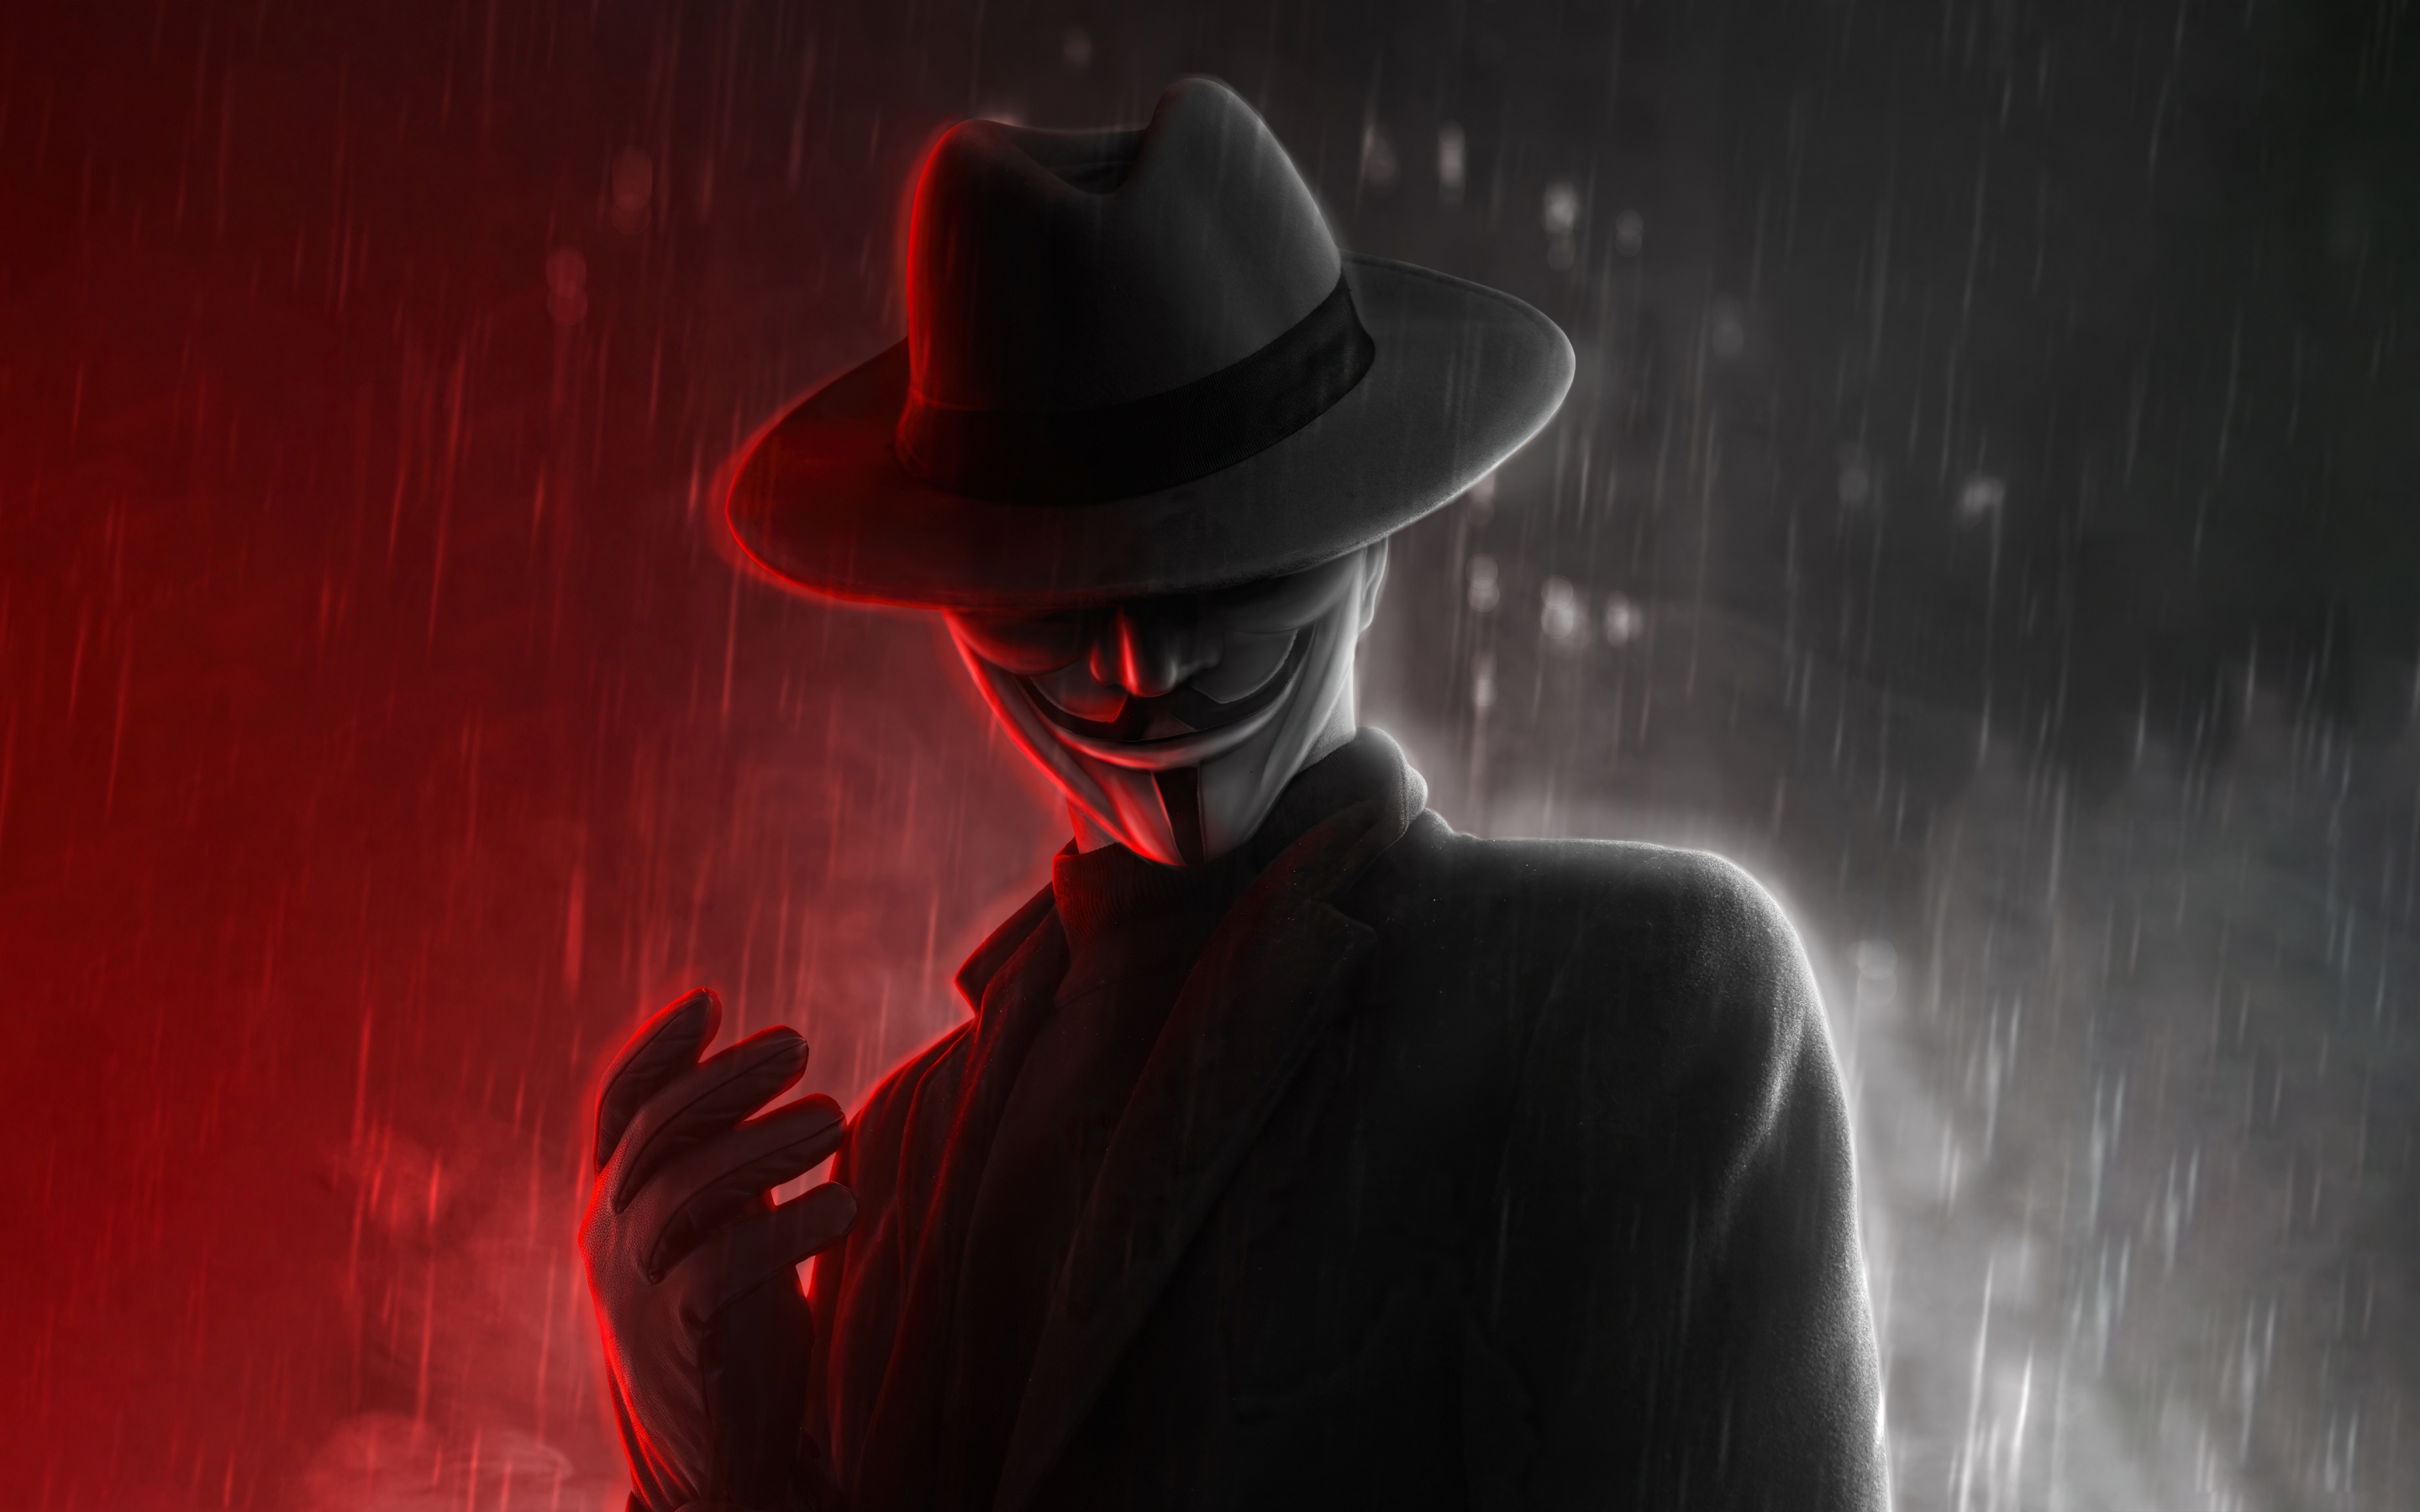 Anonymus, laughing mask, dirty, 2880x1800 wallpaper